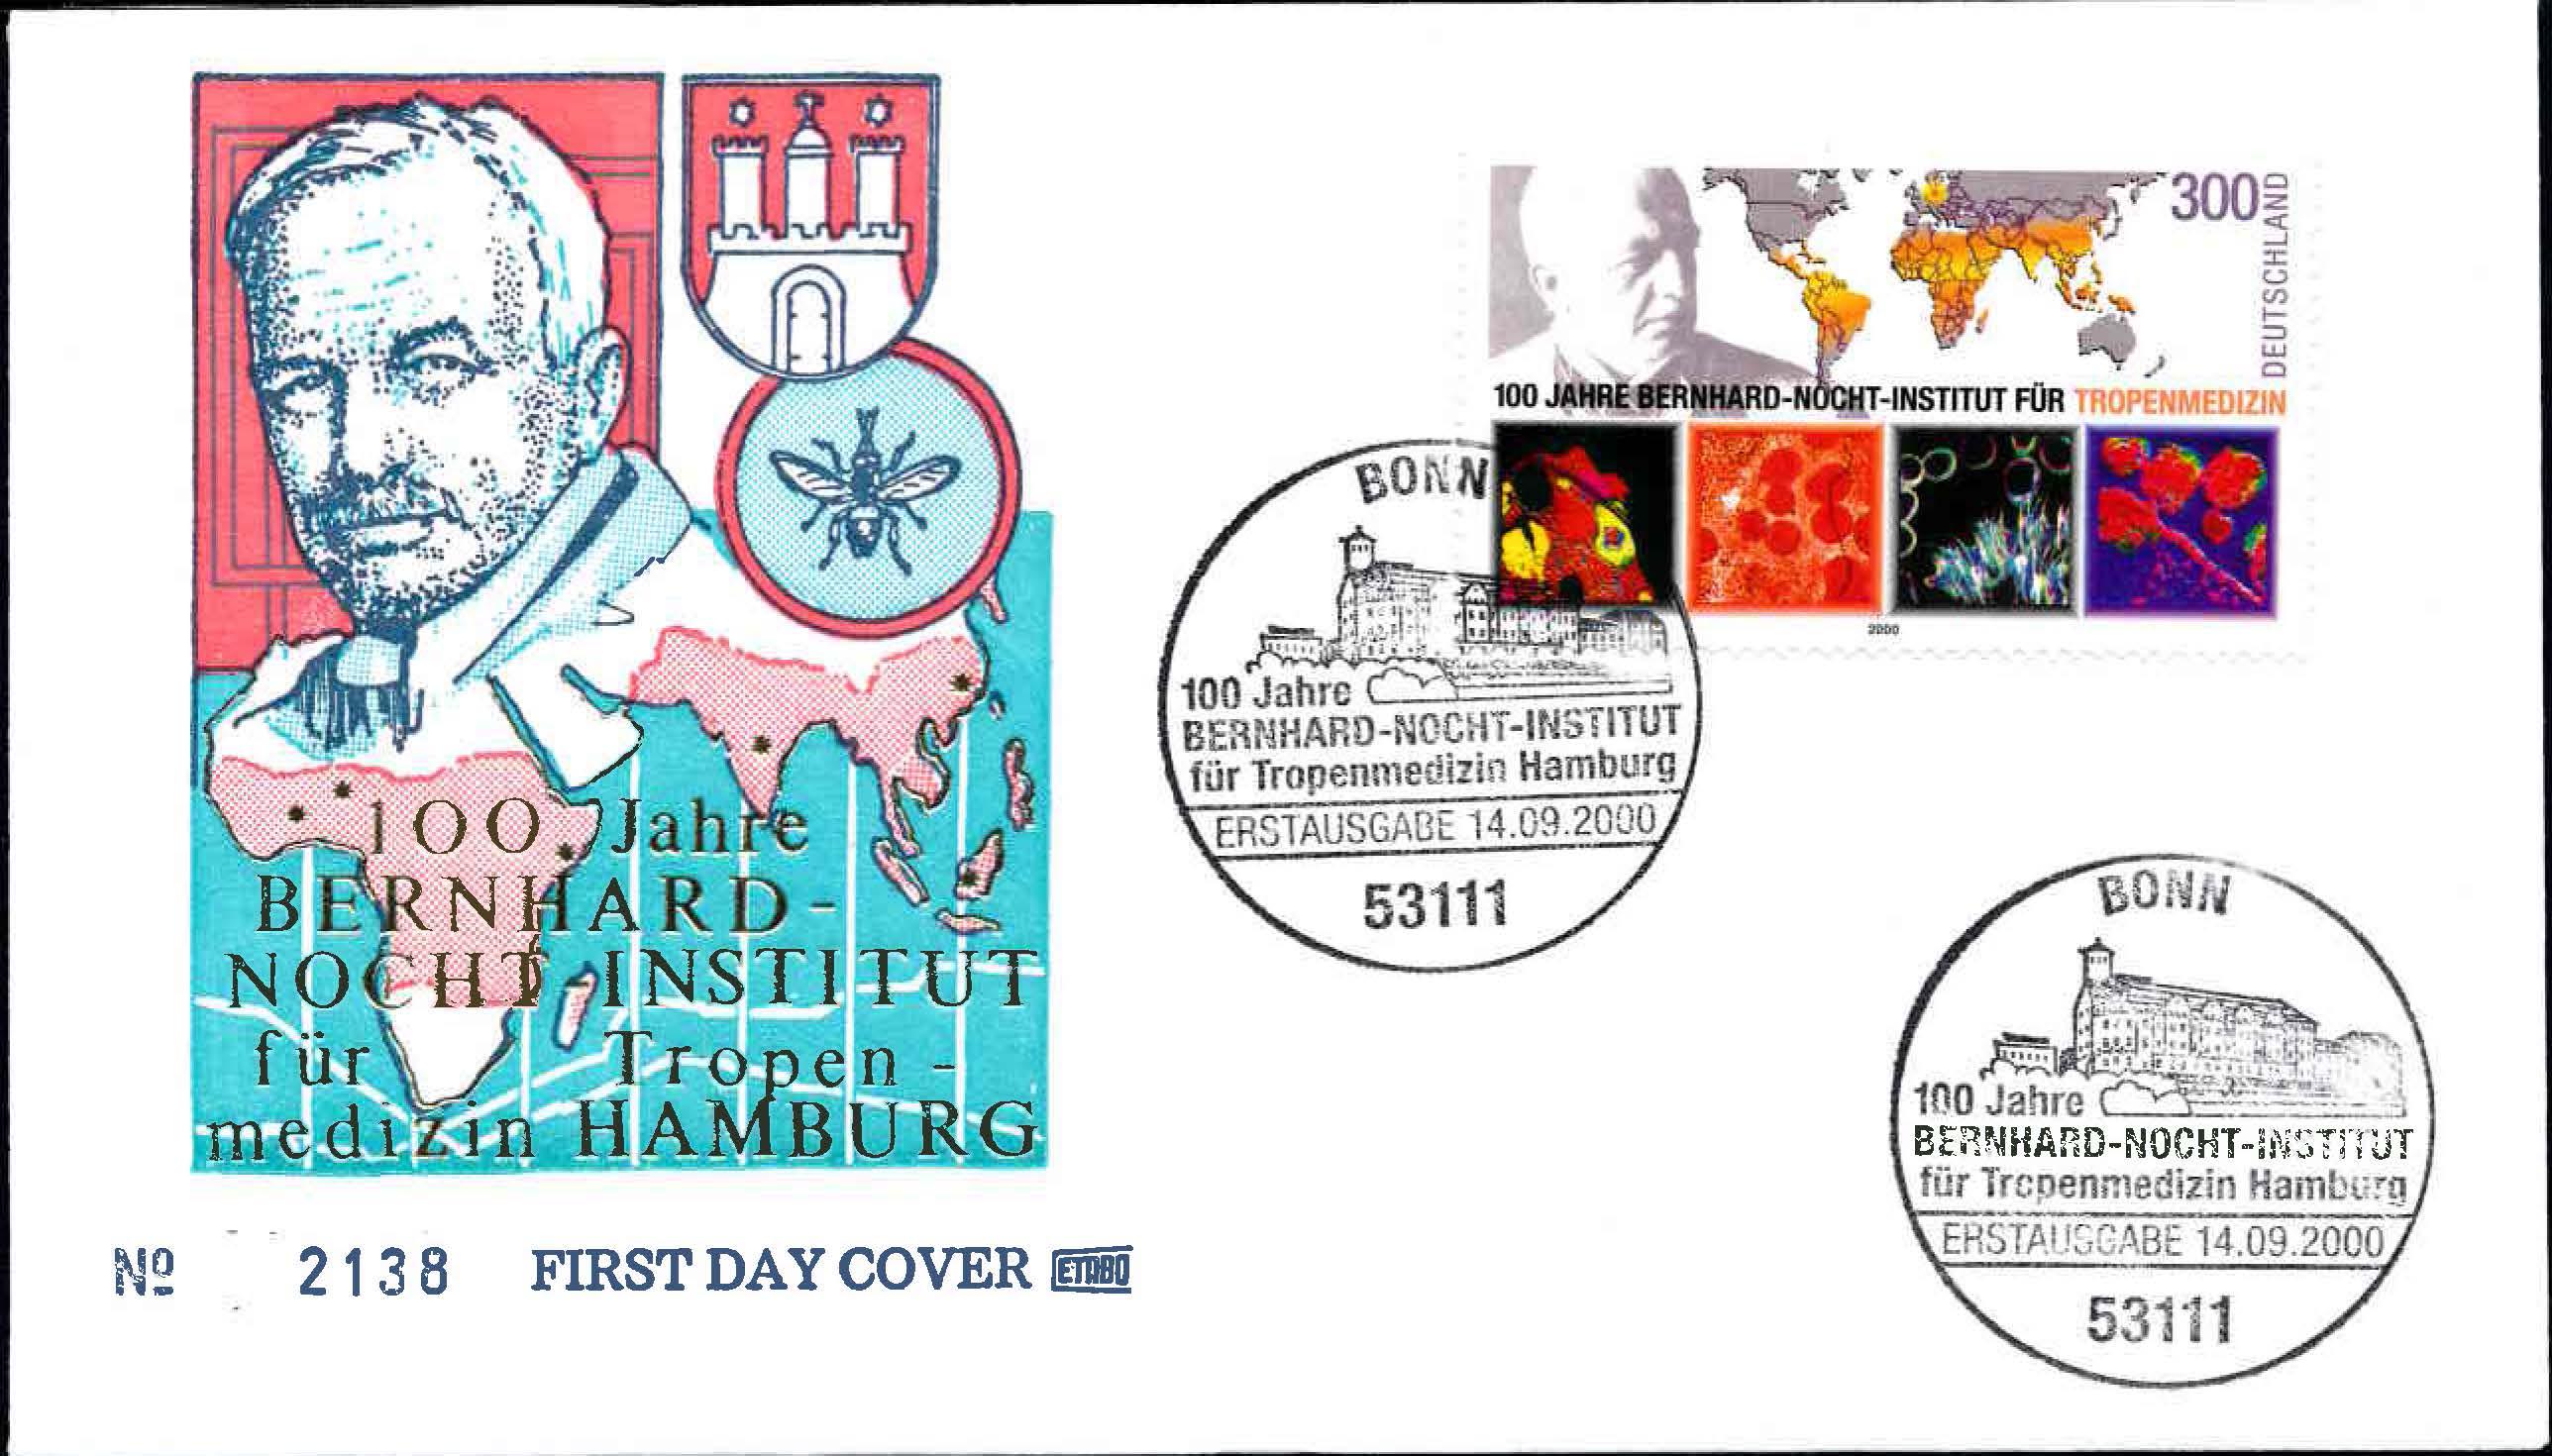 Germany Scott 2101 First Day Cover, Cachet 3, Bonn Cancellation